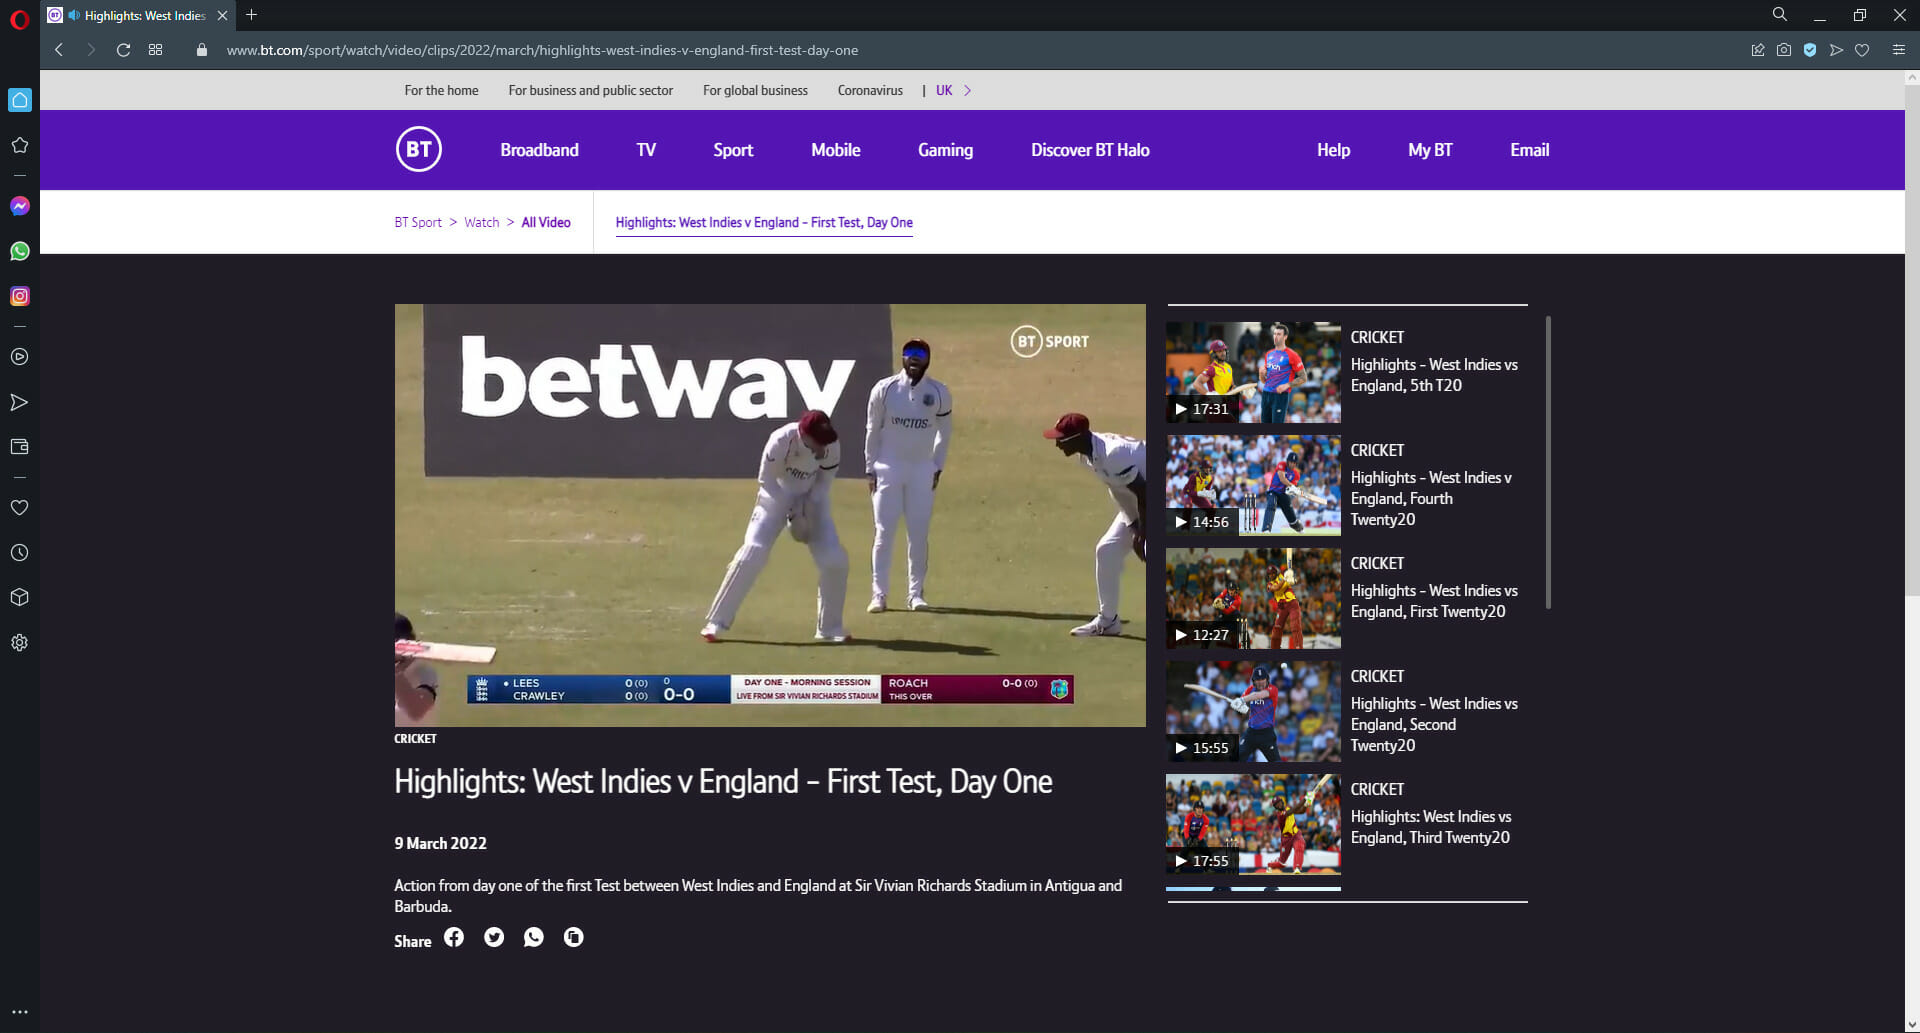 Opera is the best browser for BT Sport.